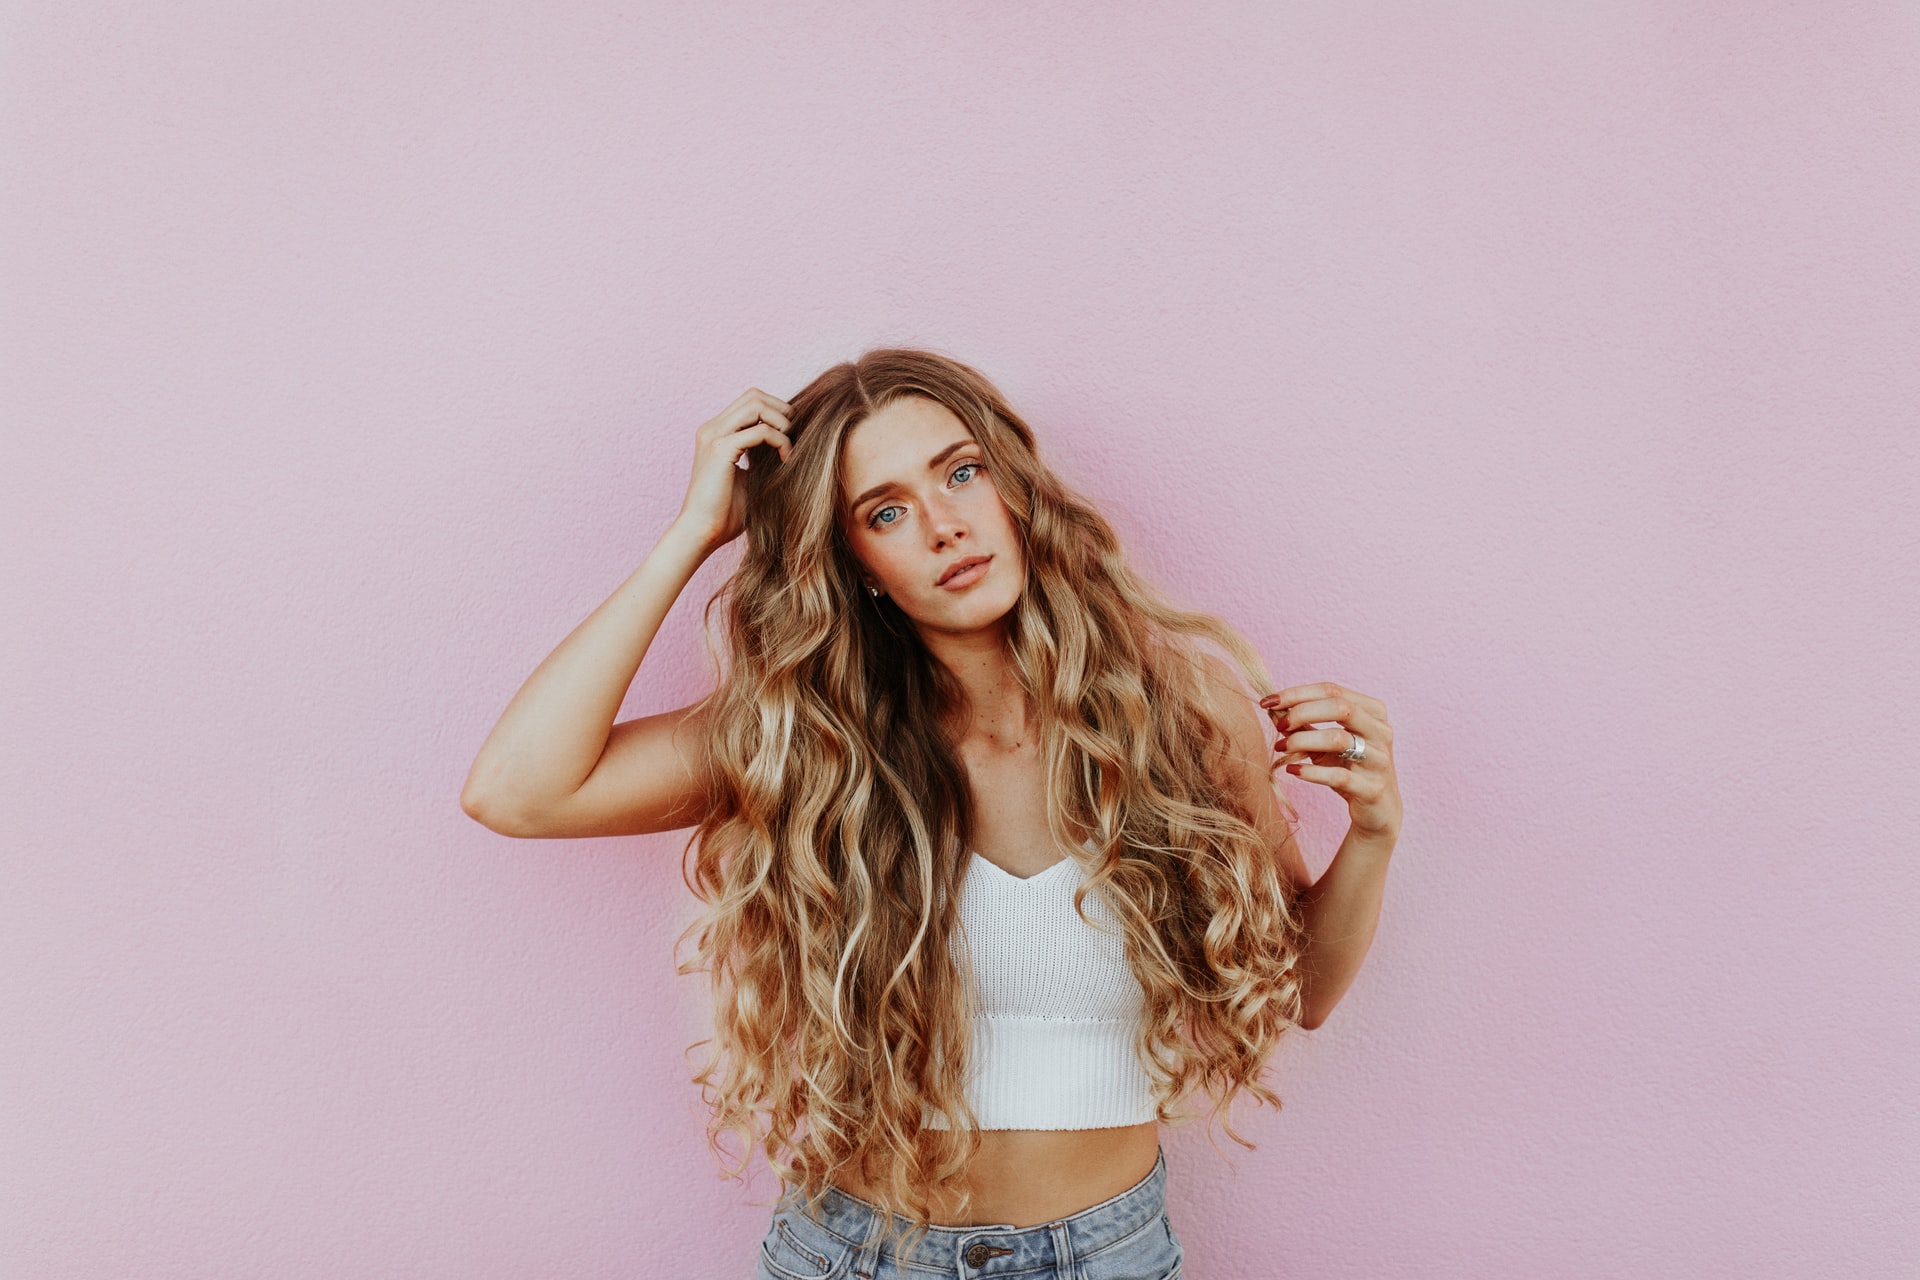 How can I make my hair beautiful and thick?